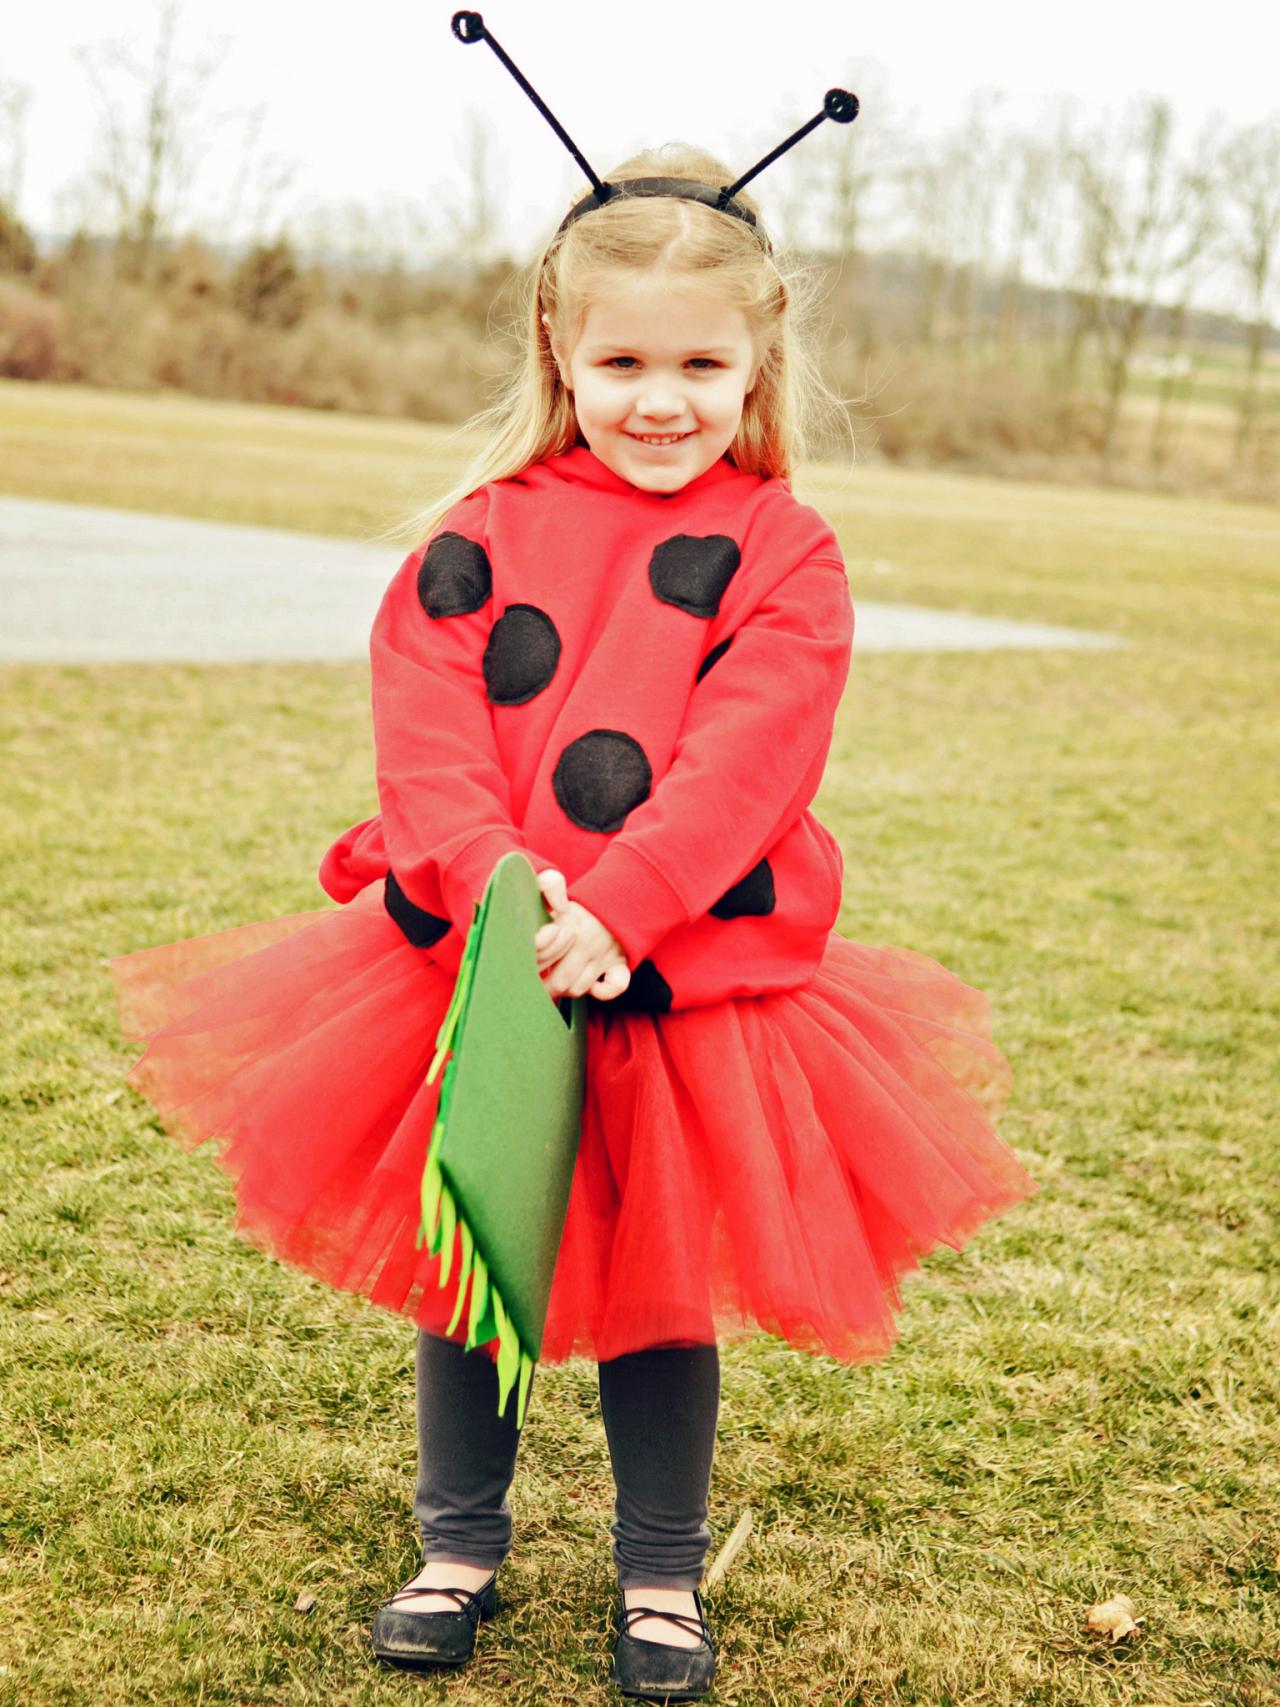 Ladybug Outfit Personalized Ladybug Outfit Ladybug One Piece Ladybug Halloween Outfit Ladybug Dress with Hat Baby Girl Birthday